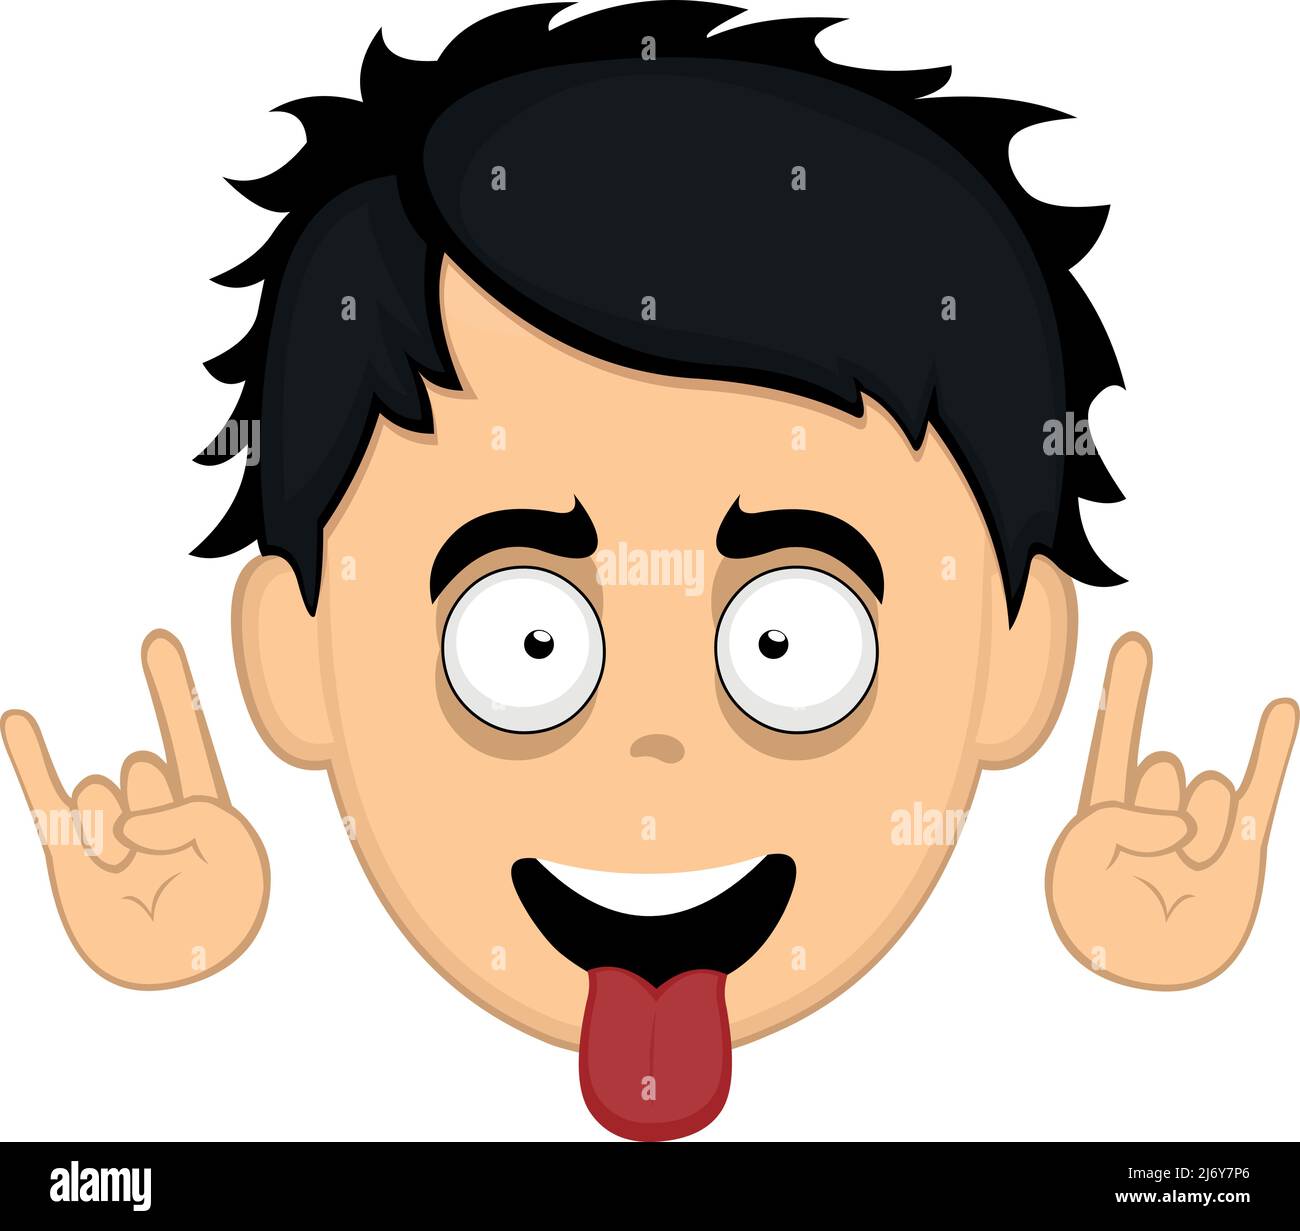 Vector illustration of the face of a cartoon man making the classic heavy metal gesture with his hands and sticking out his tongue Stock Vector